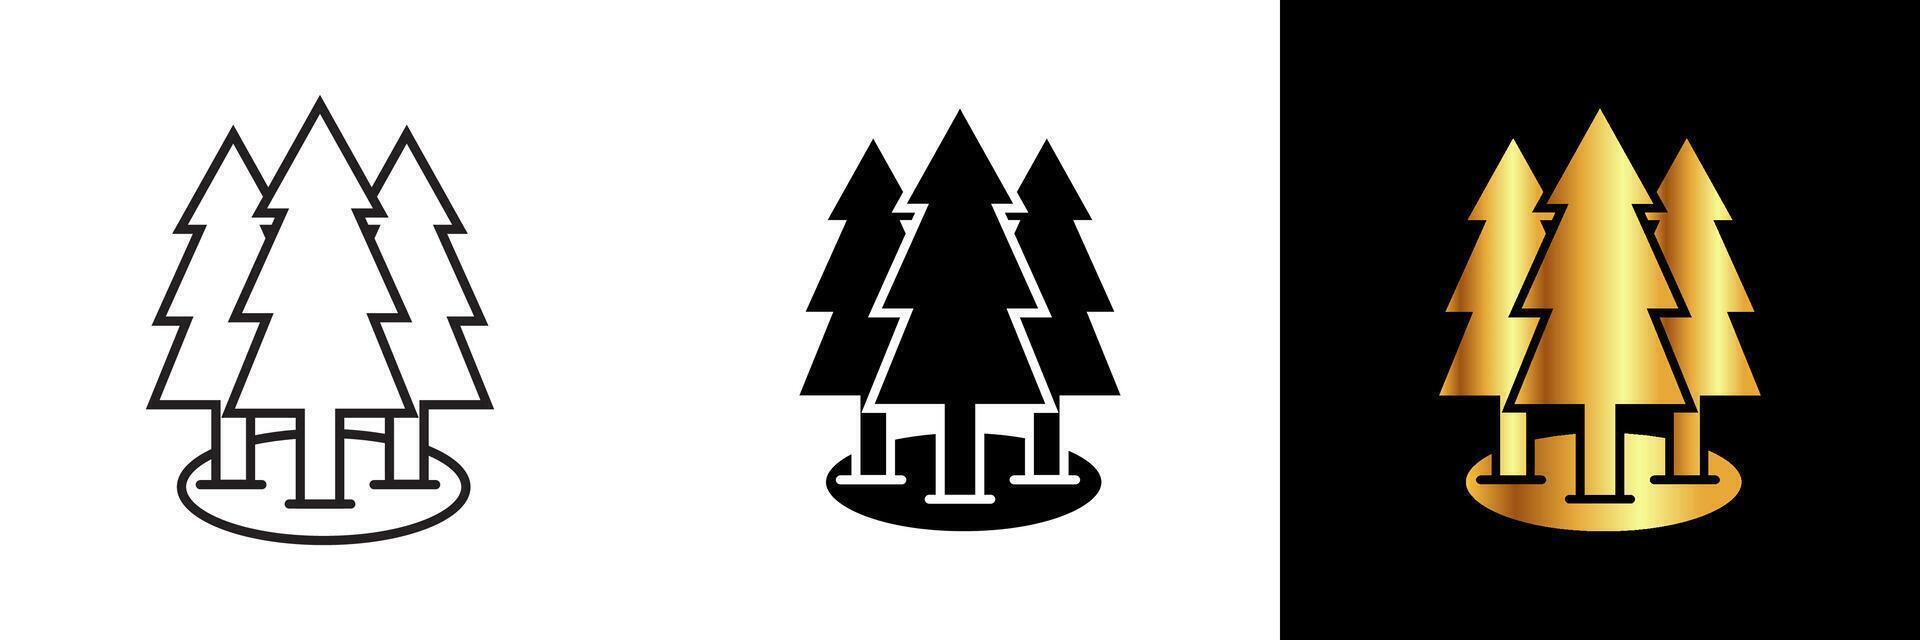 The Pine Tree icon symbolizes strength, endurance, and natural beauty. It represents the resilience of nature, standing tall and green even in the harshest winter months. vector